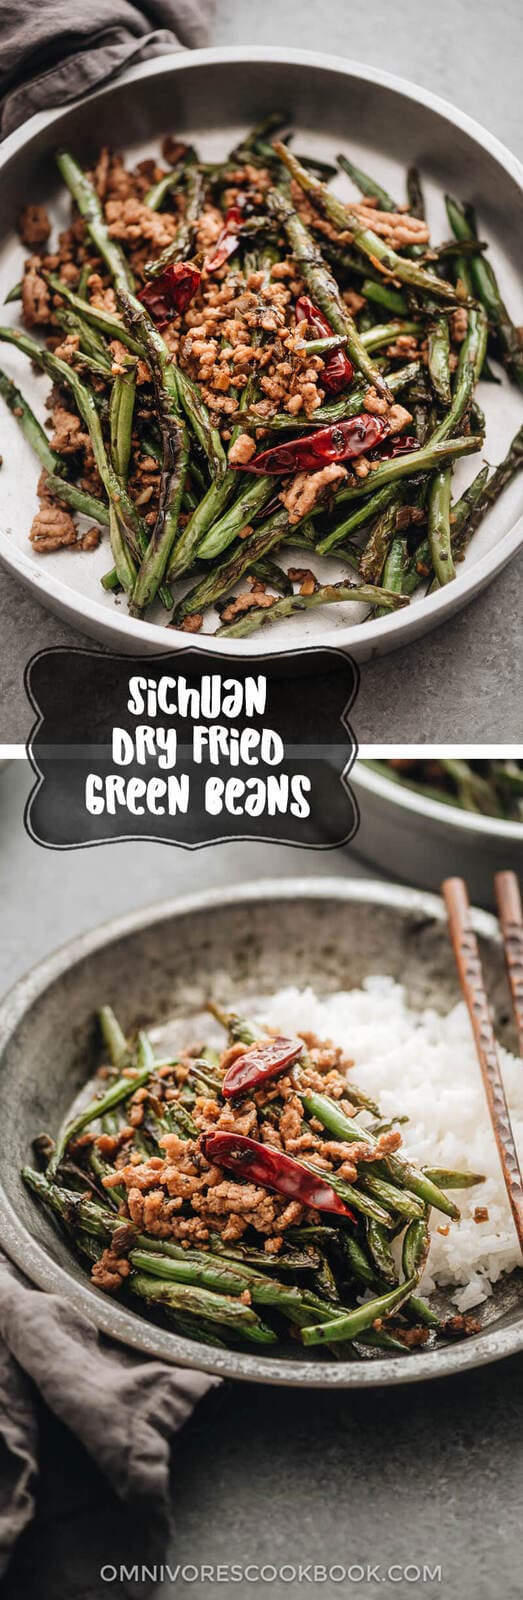 Sichuan Dry Fried Green Beans (干煸四季豆) - Blistered and charred green beans are tossed with an aromatic sauce, making this dish too good to pass up, and it’s substantial enough to serve as a main. {Vegan Adaptable, Gluten Free Adaptable}